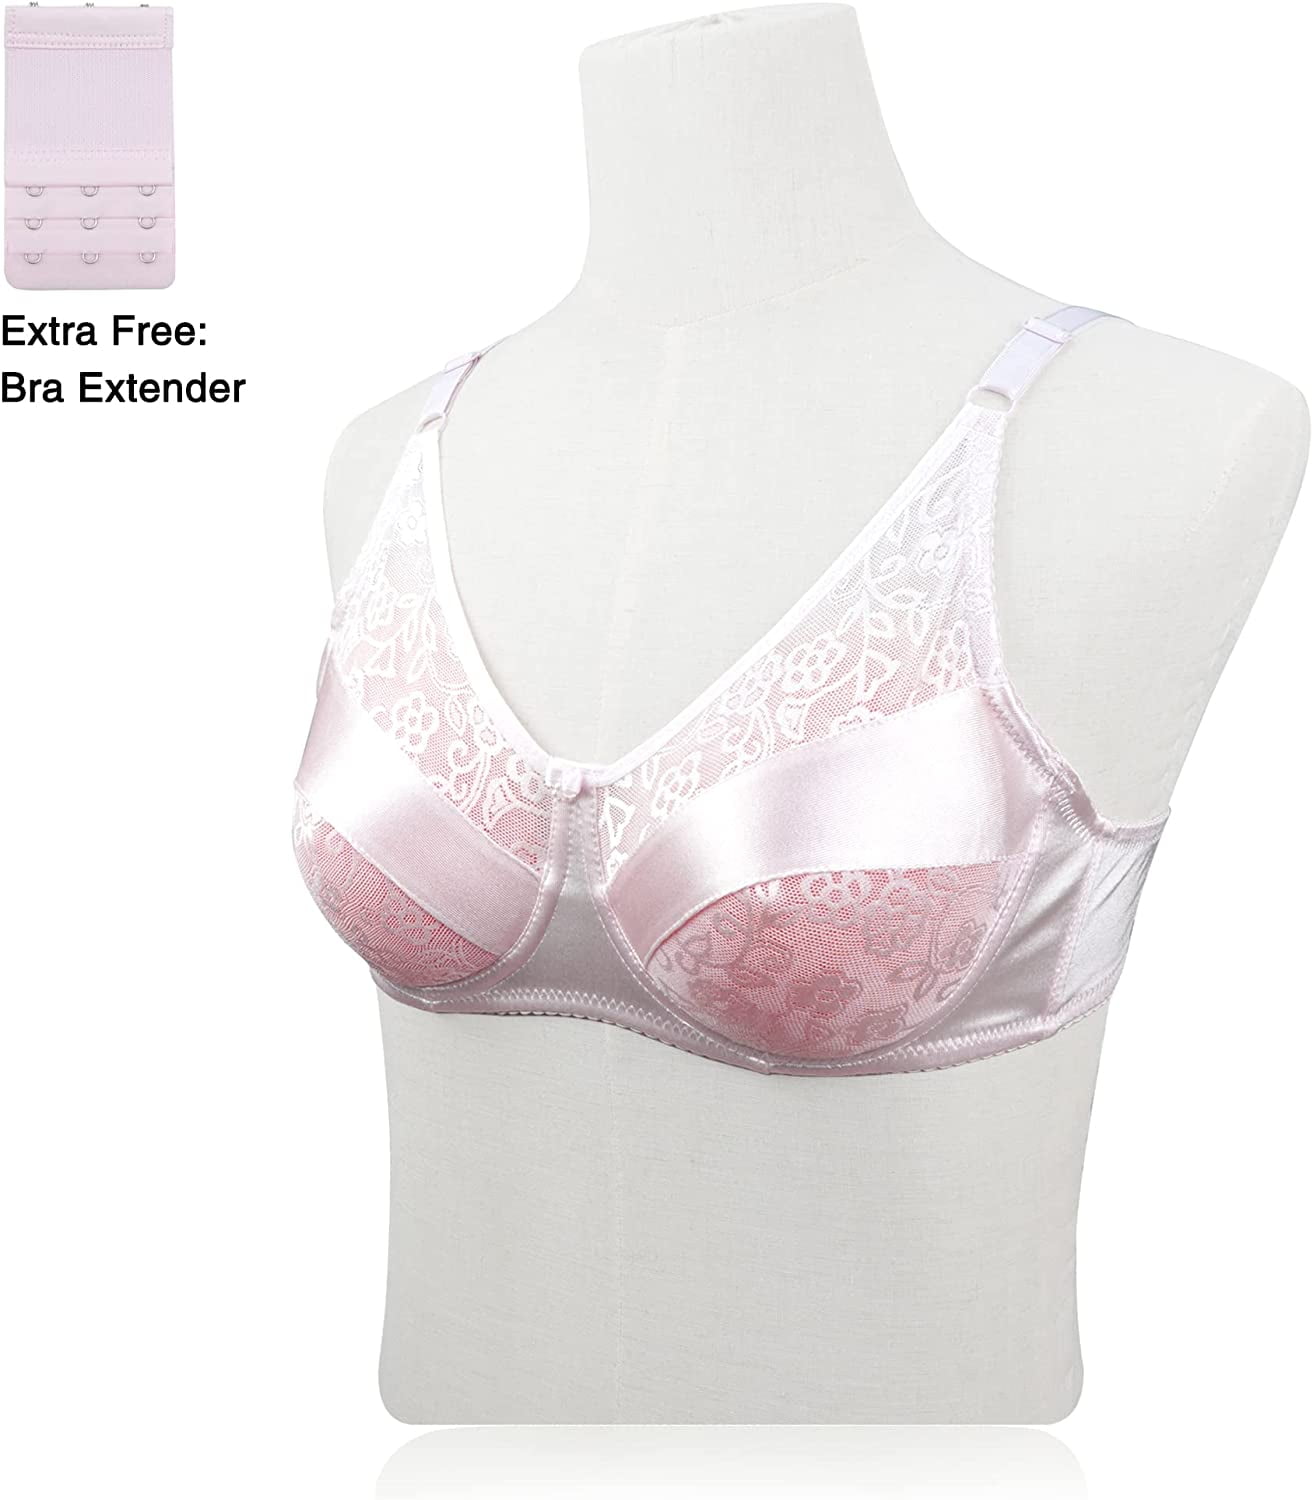 8988mastectomy Bra Comfort Pocket Bra For Silicone Breast Forms